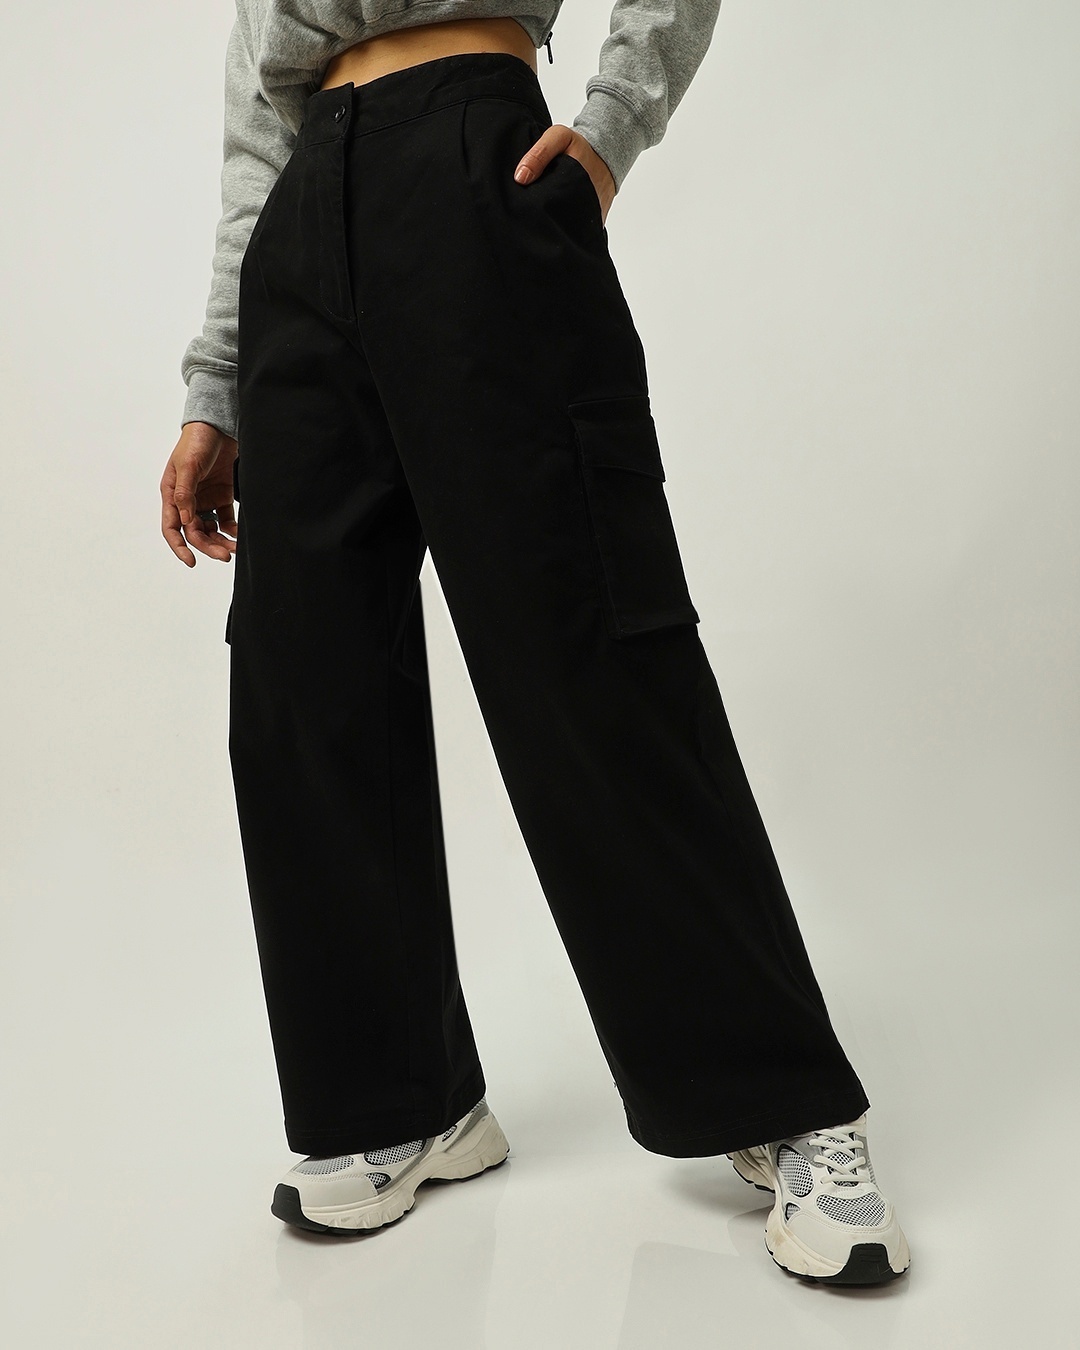 How to Style Black Cargo Pants and Not Look Like You're Stuck in the Past | Cargo  pants outfit, Black cargo pants, Cargo pants style